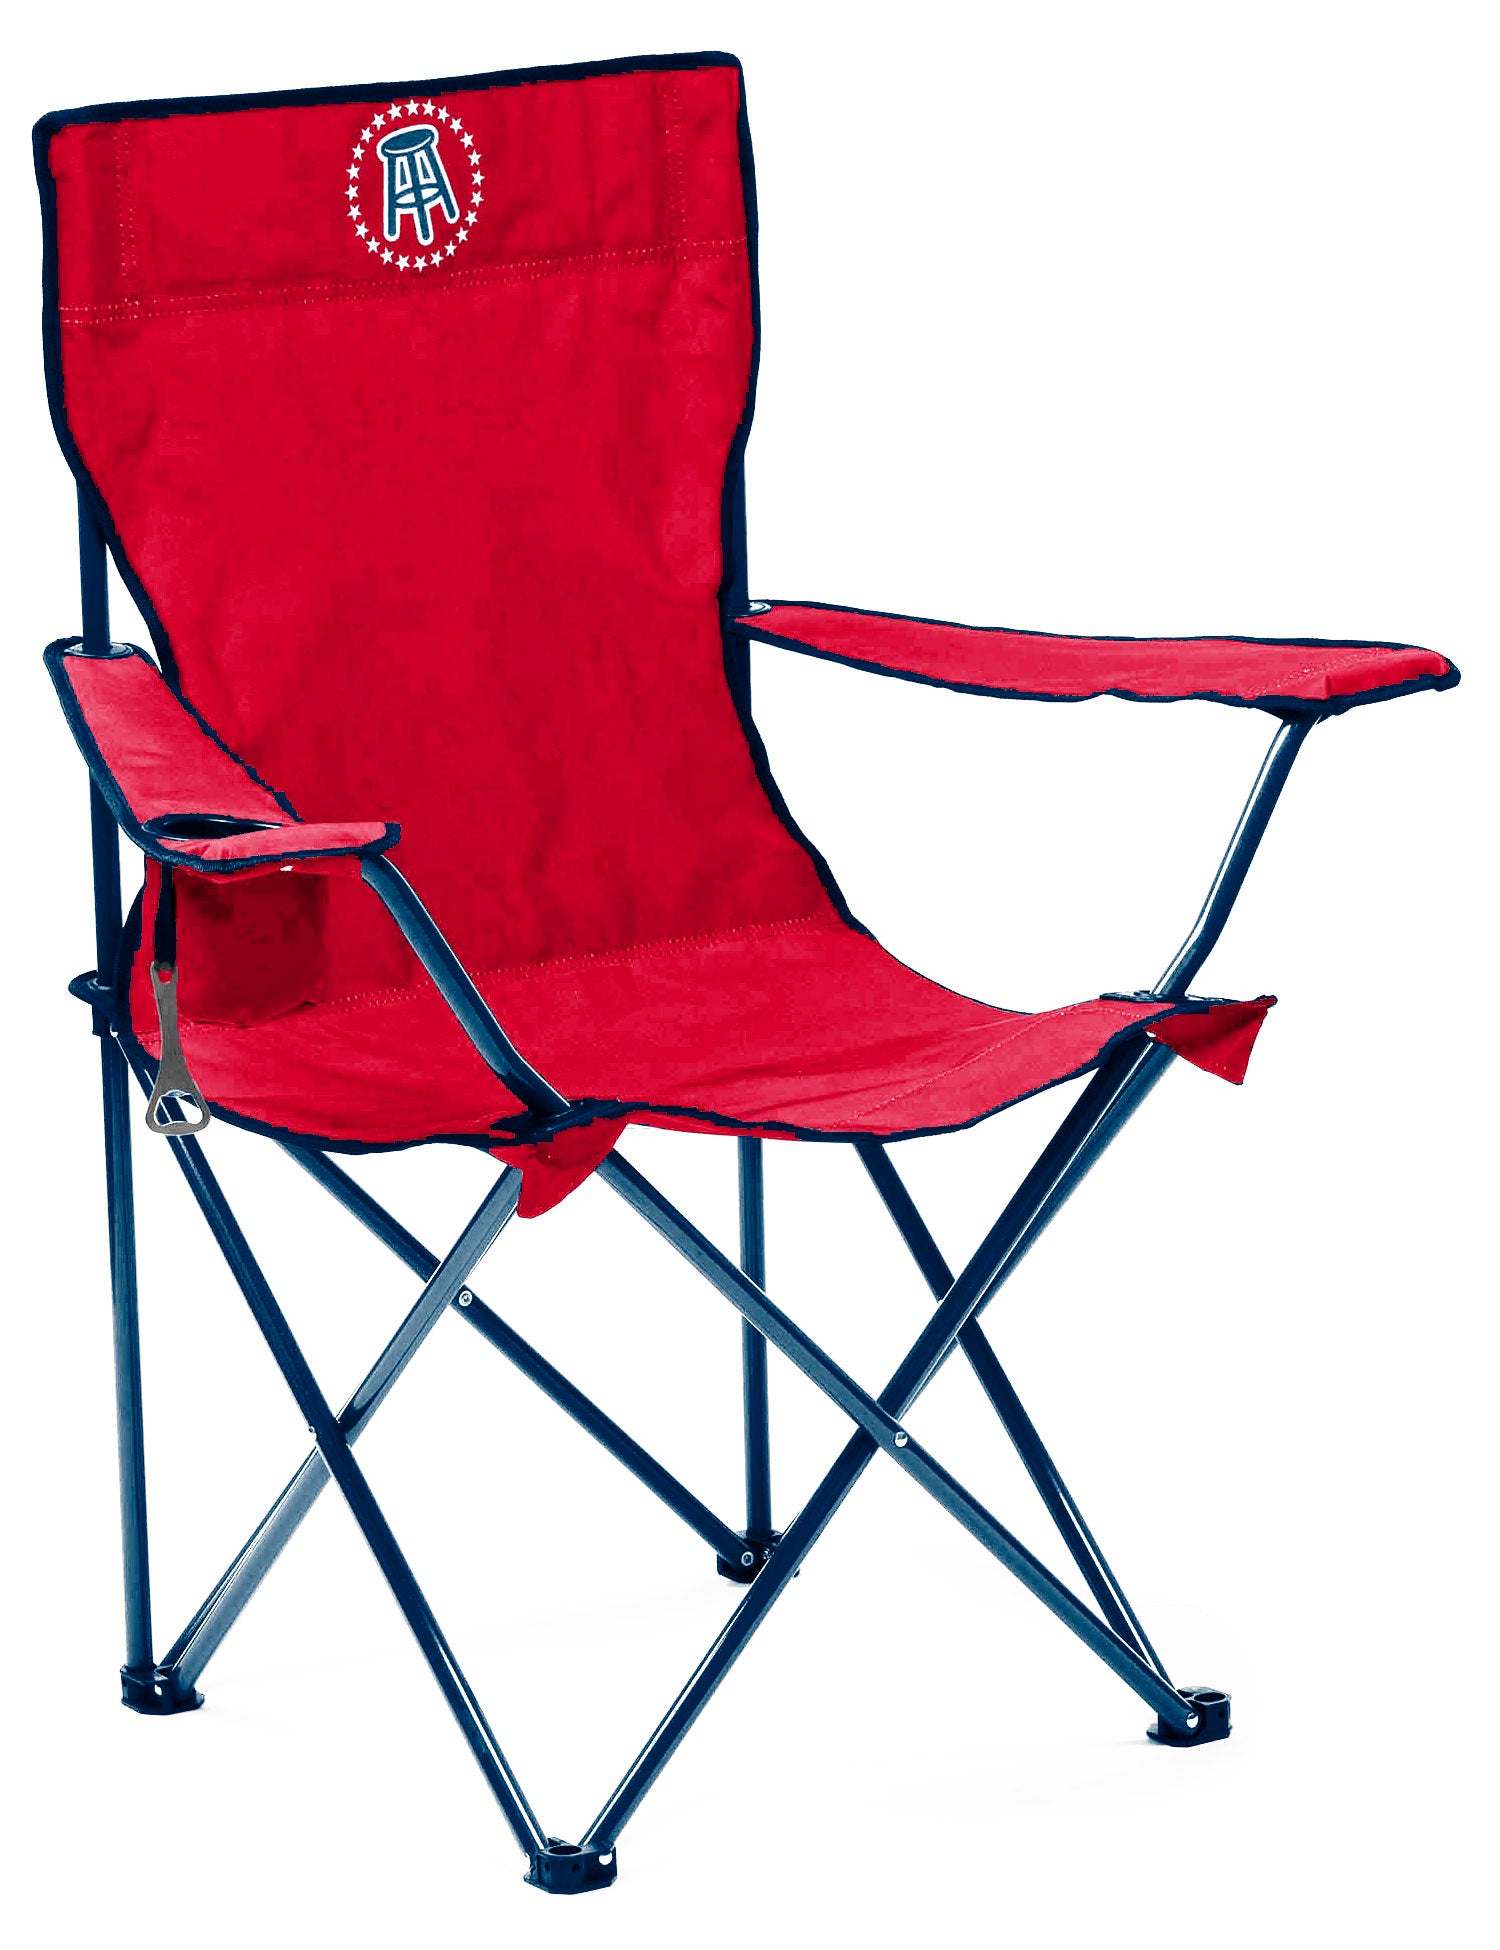 Barstool Sports Red Folding Chair